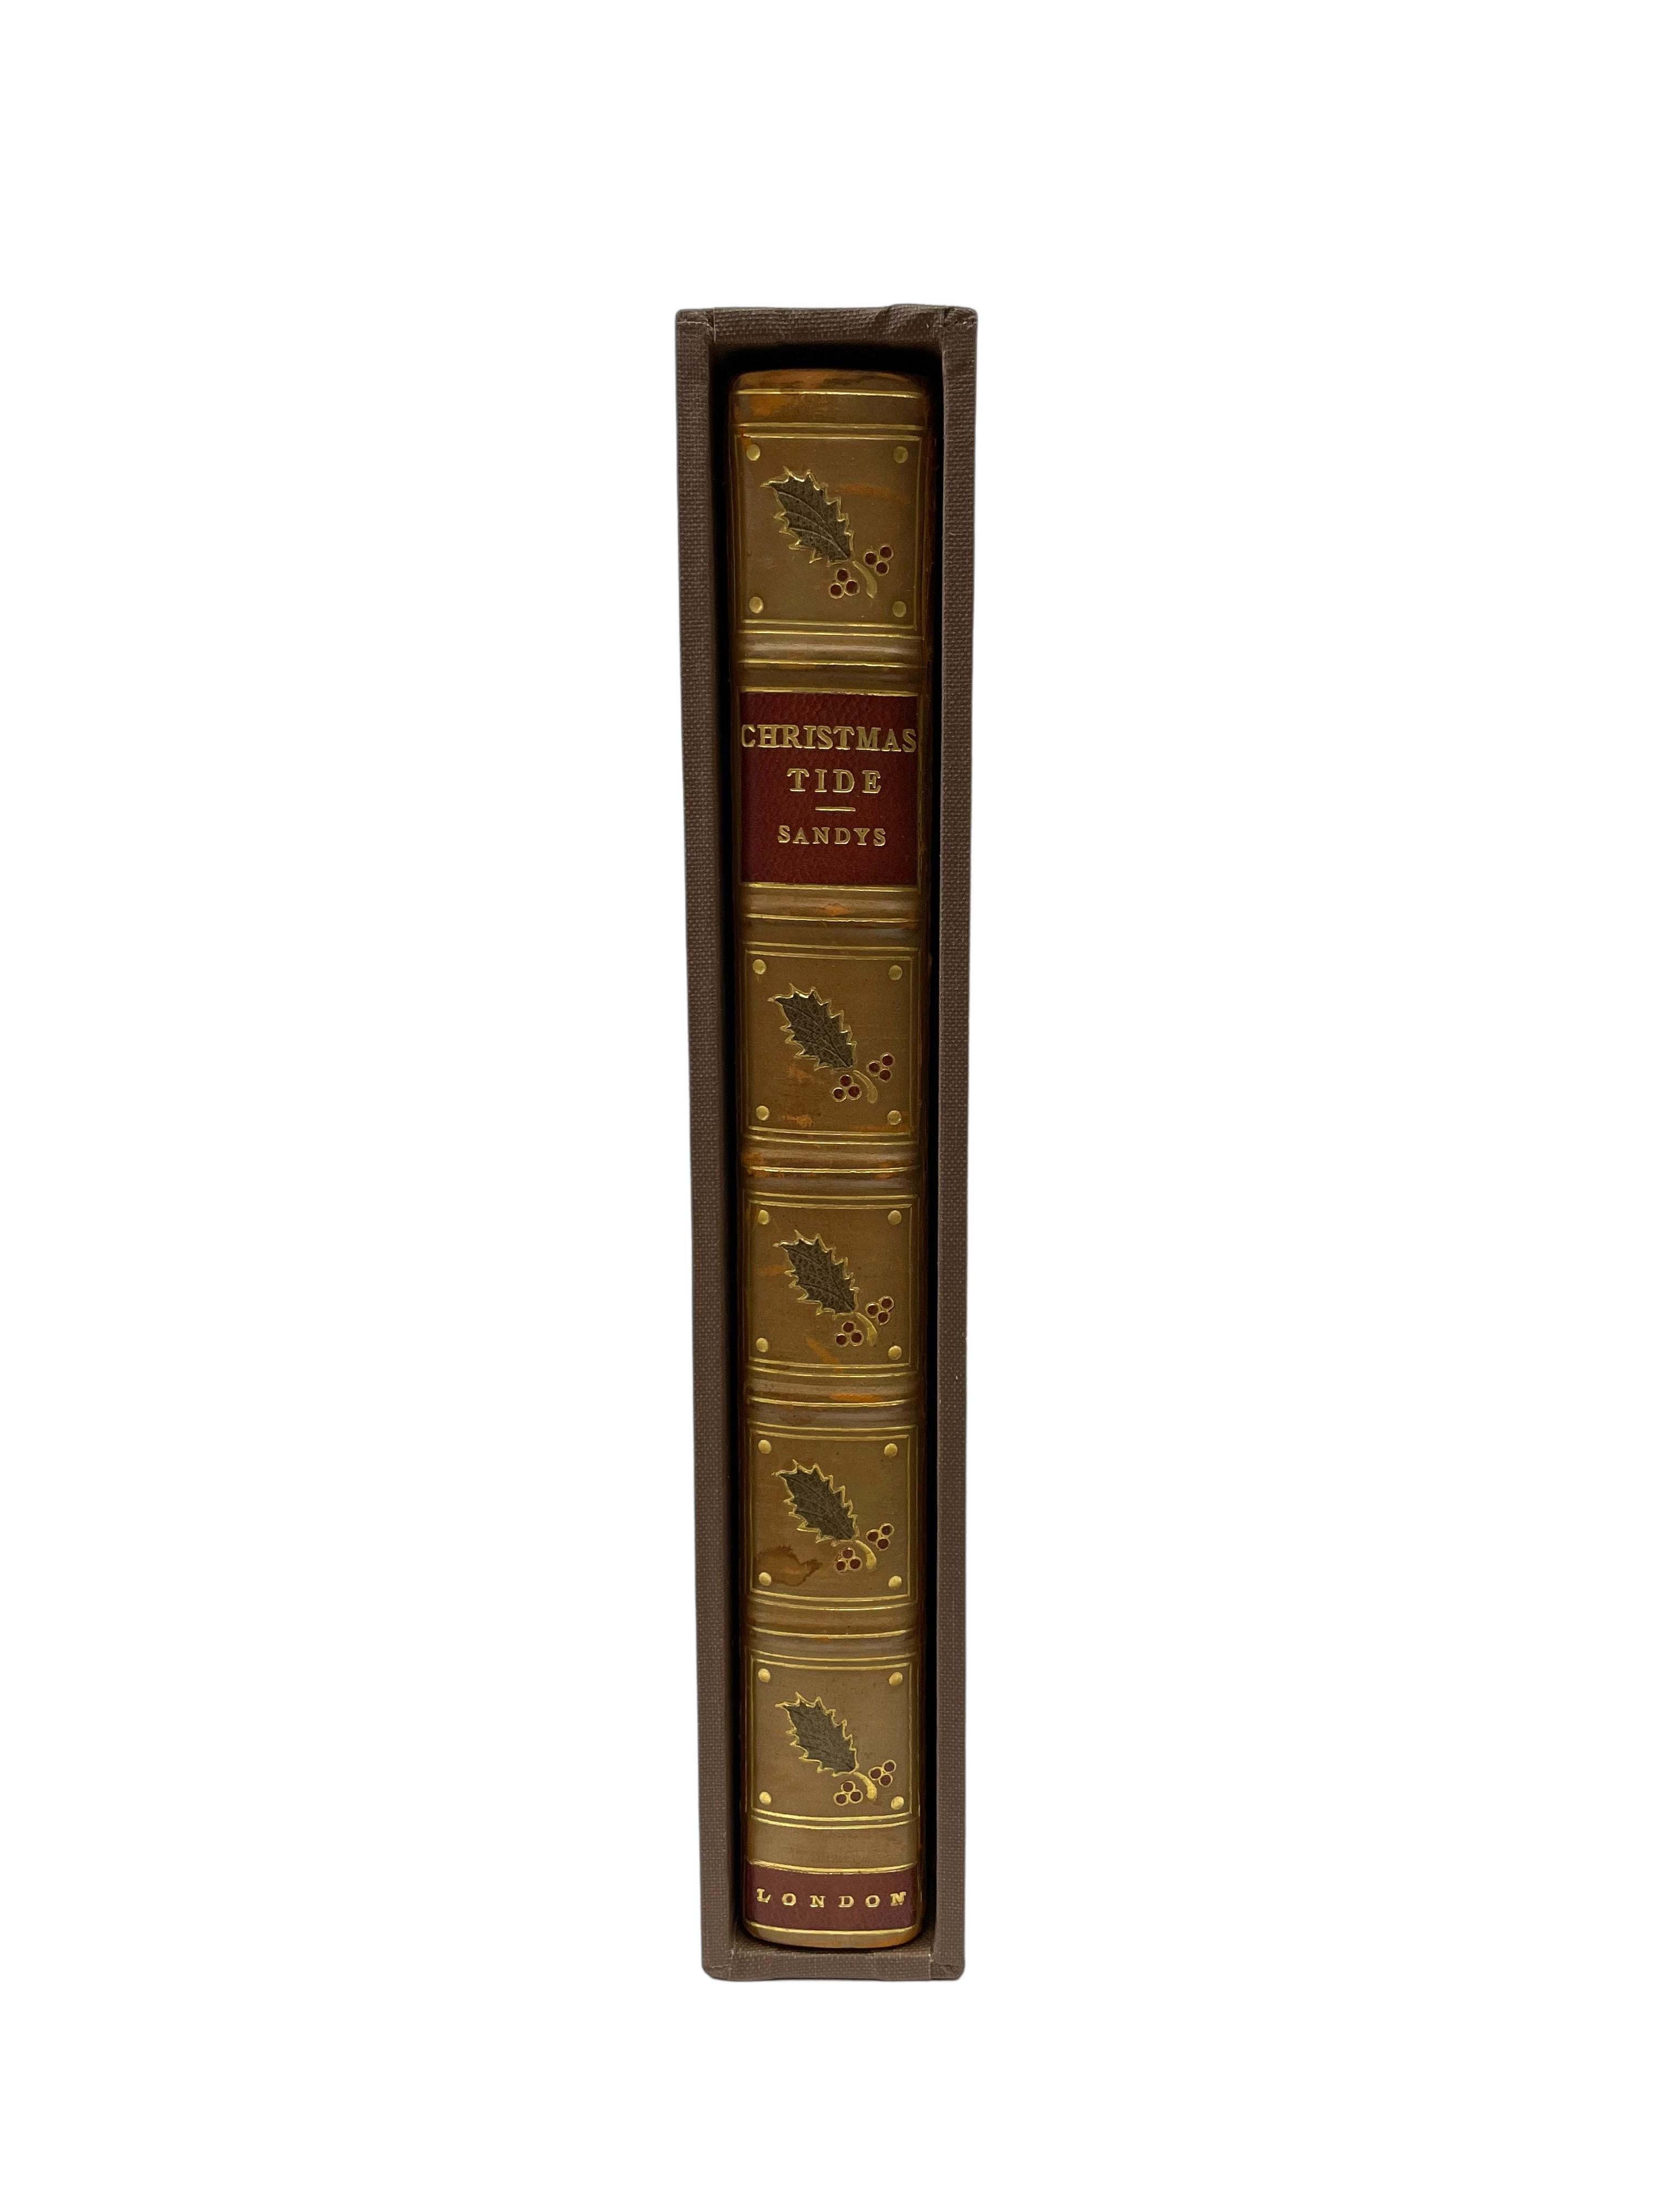 Paper Christmastide: Its History, Festivities and Carols, by William Syndys, 1852 For Sale